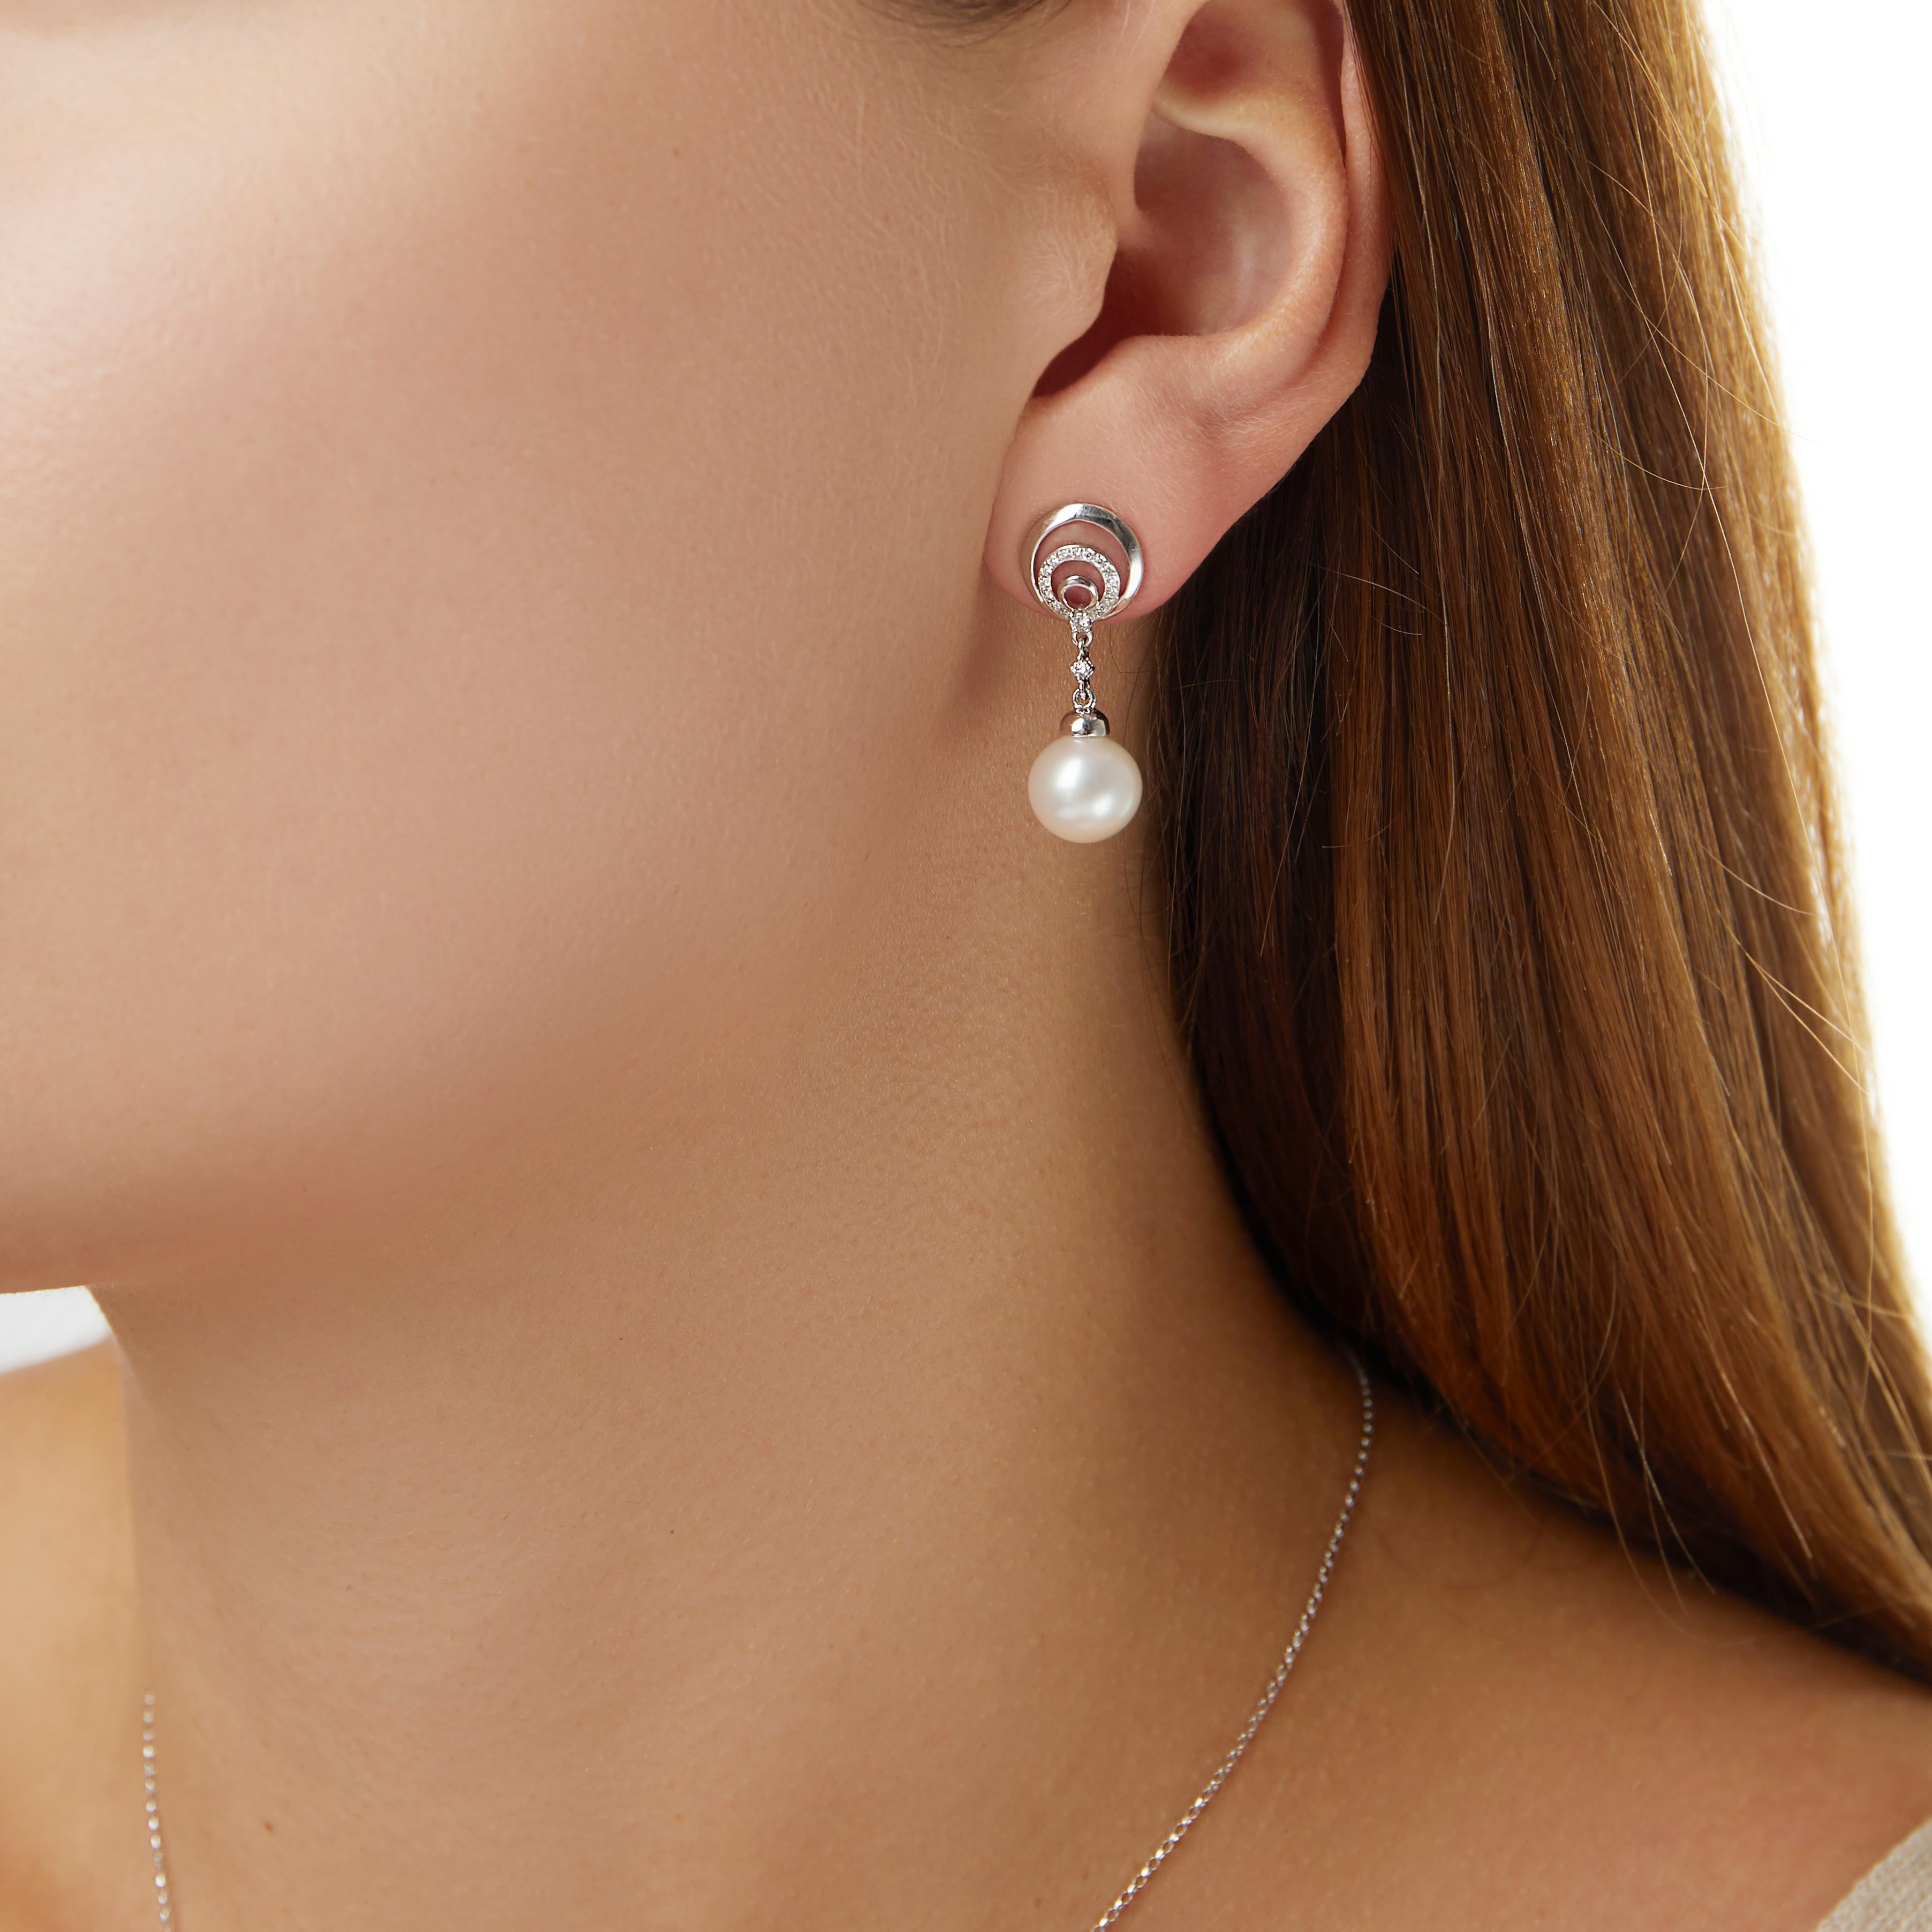 These elegant earrings by Yoko London feature lustrous Freshwater pearls beneath hypnotic diamond circles. These unique earrings have been handcrafted by experts in our London workshop and will add a touch of sparkle to any outfit. 
- 10-11mm